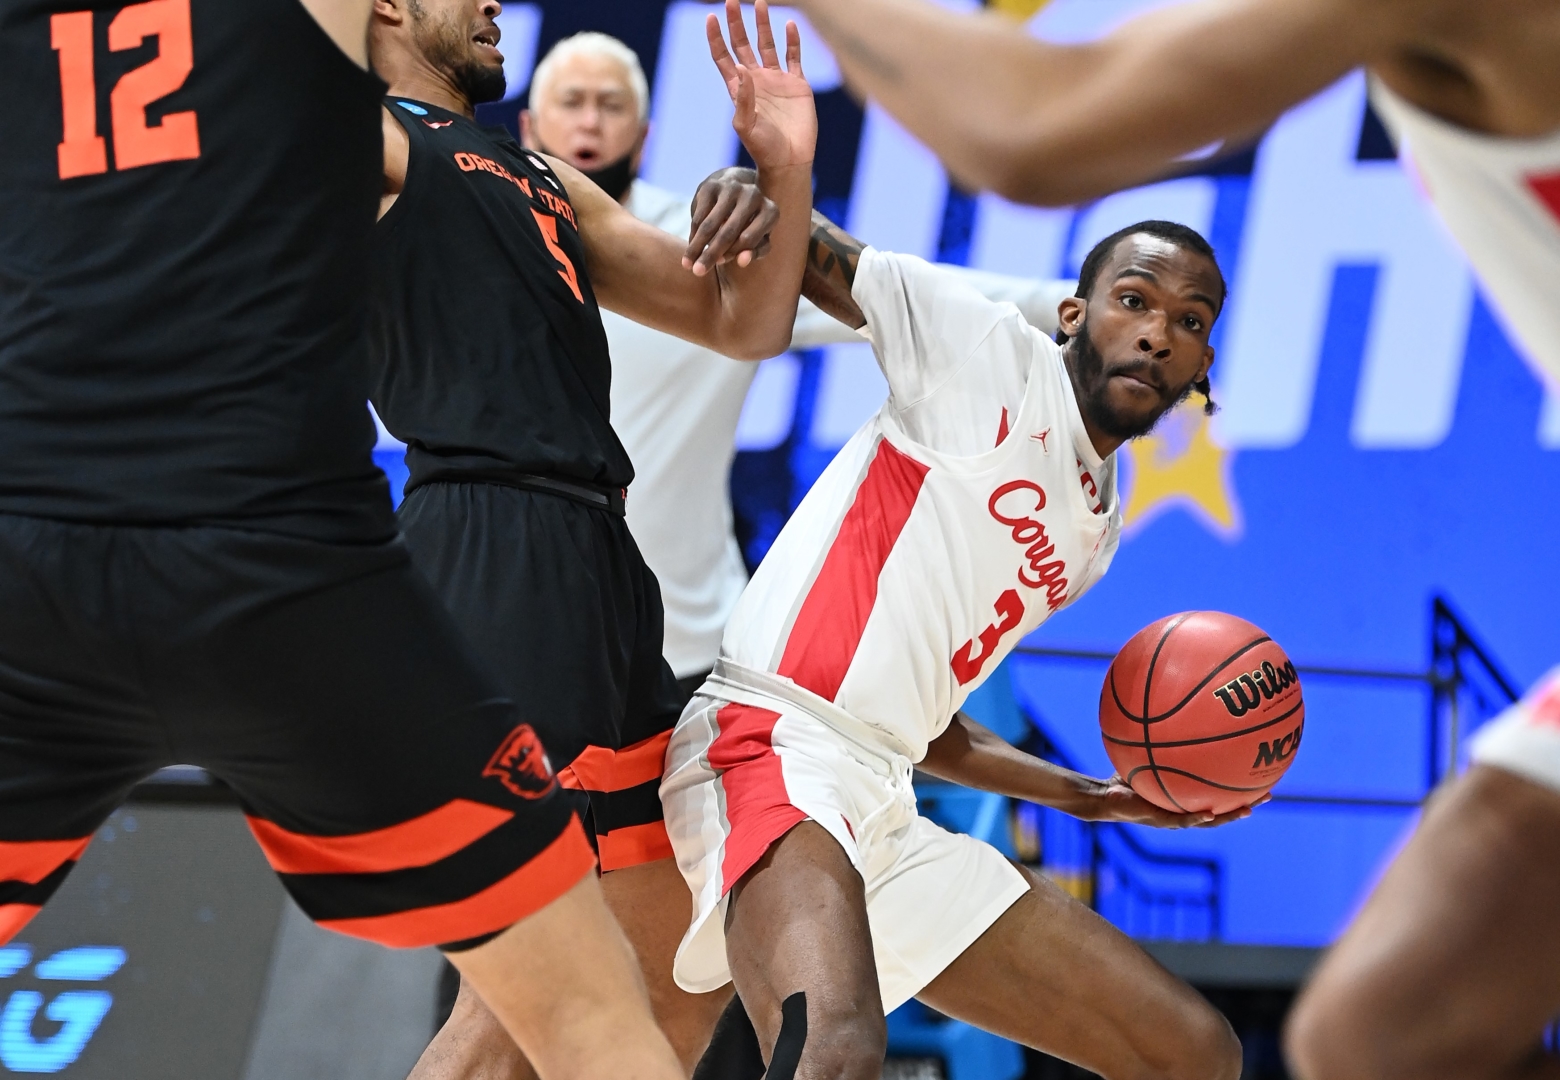 DeJon Jarreau (3) of the Houston Cougars looks to pass against the Oregon State Beavers in the Elite Eight round of the 2021 NCAA Division I Men's Basketball Tournament held at Lucas Oil Stadium on March 29, 2021 in Indianapolis, Indiana. | Photo by Brett Wilhelm/NCAA Photos via Getty Images